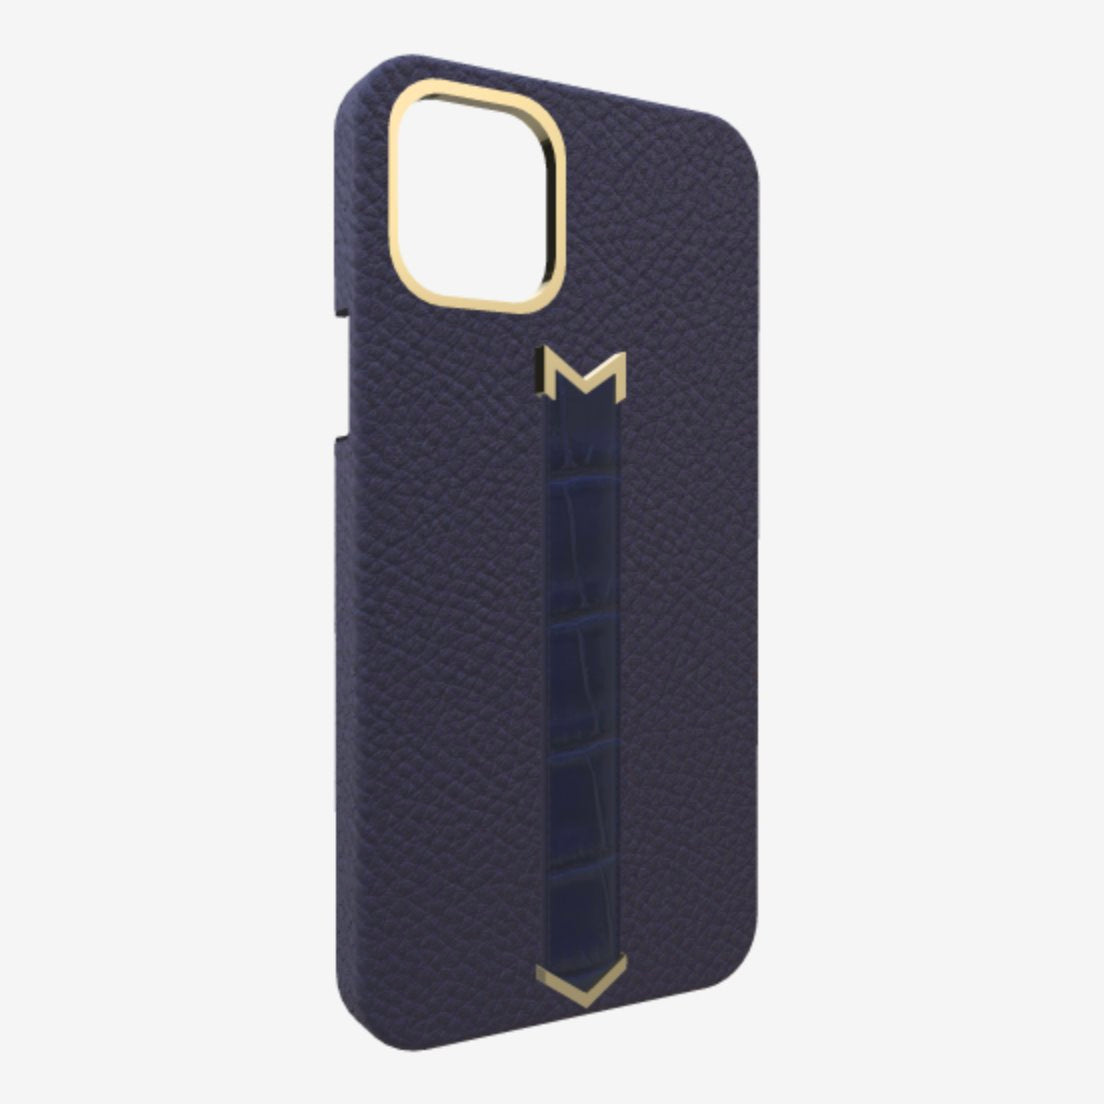 Gold Finger Strap Case for iPhone 13 Pro Max in Genuine Calfskin and Alligator Navy Blue Navy Blue 